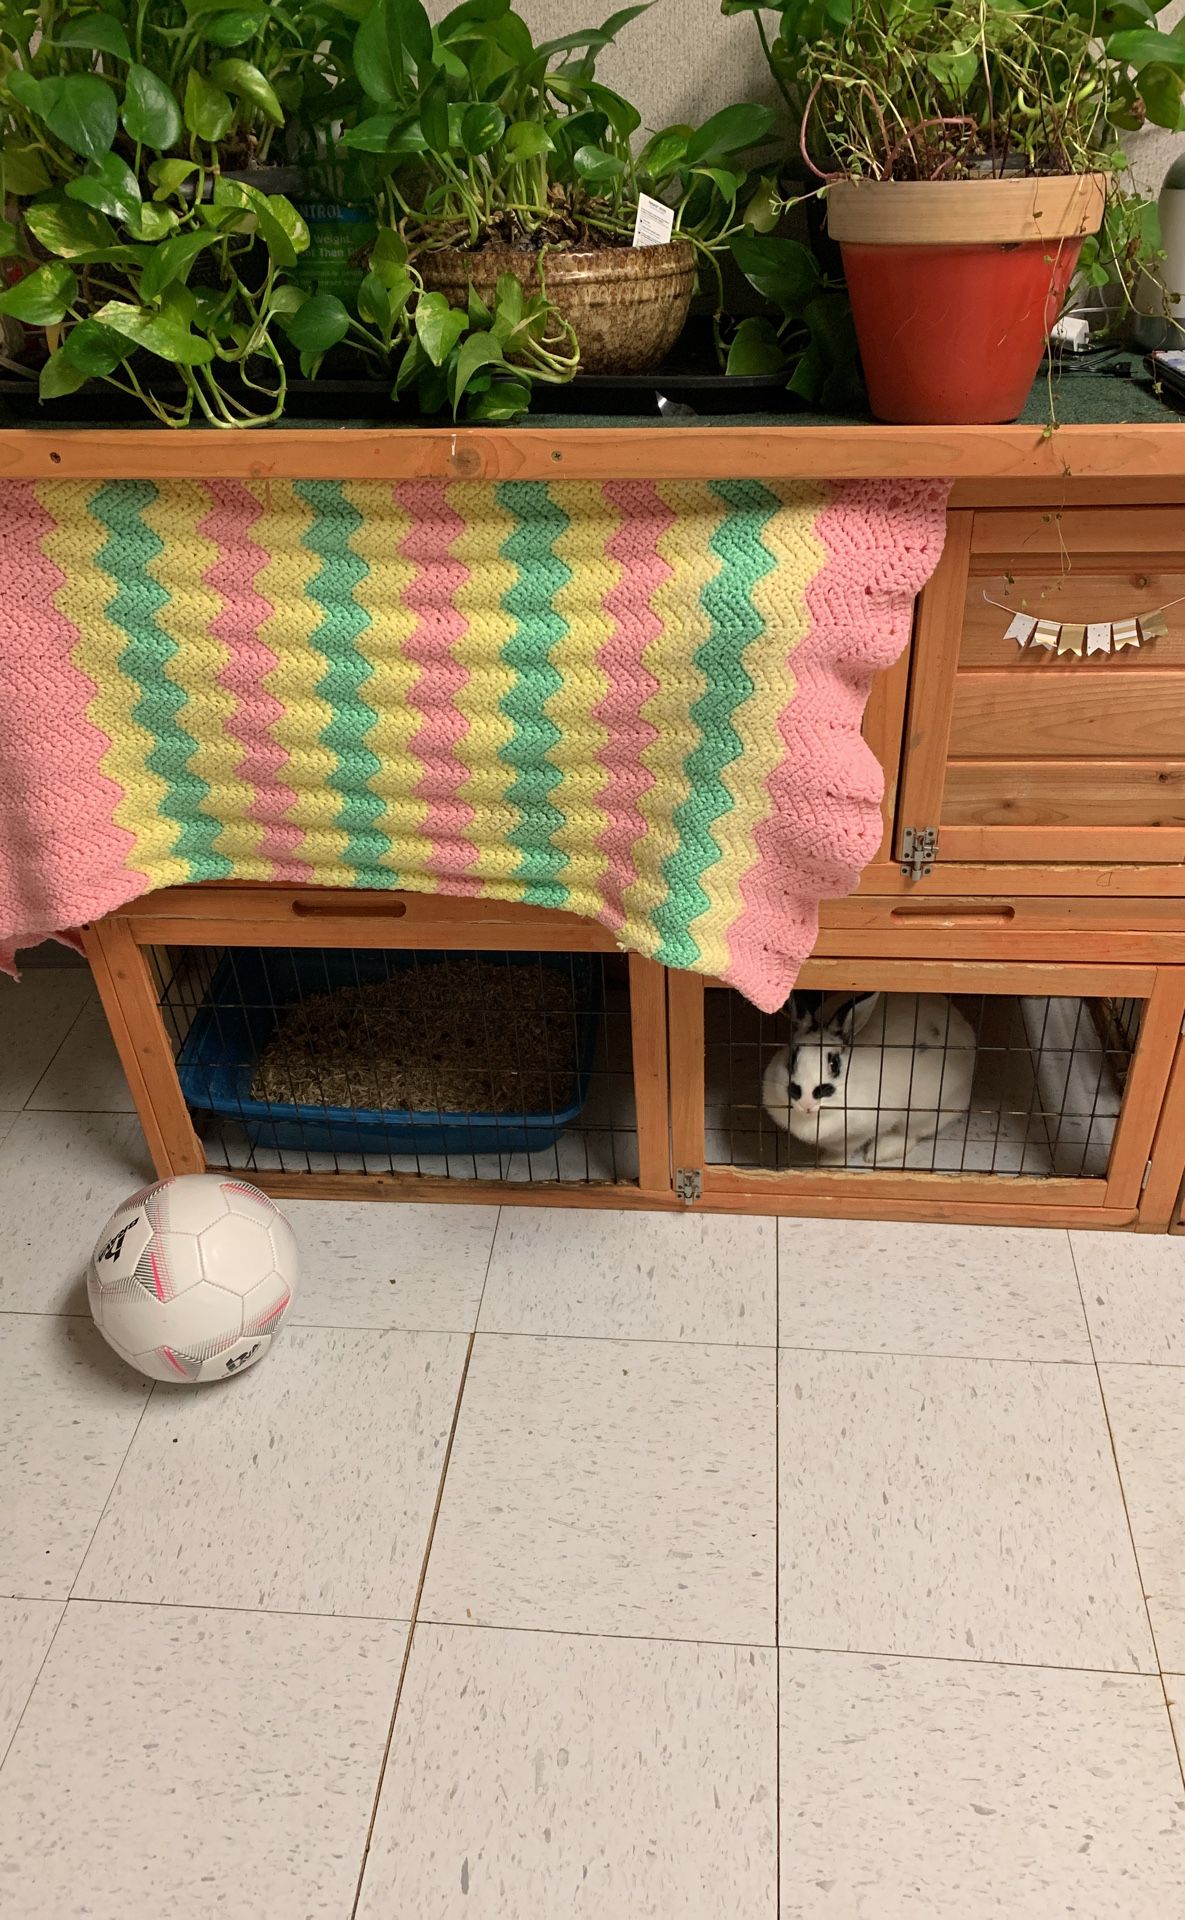 Used bunny cage